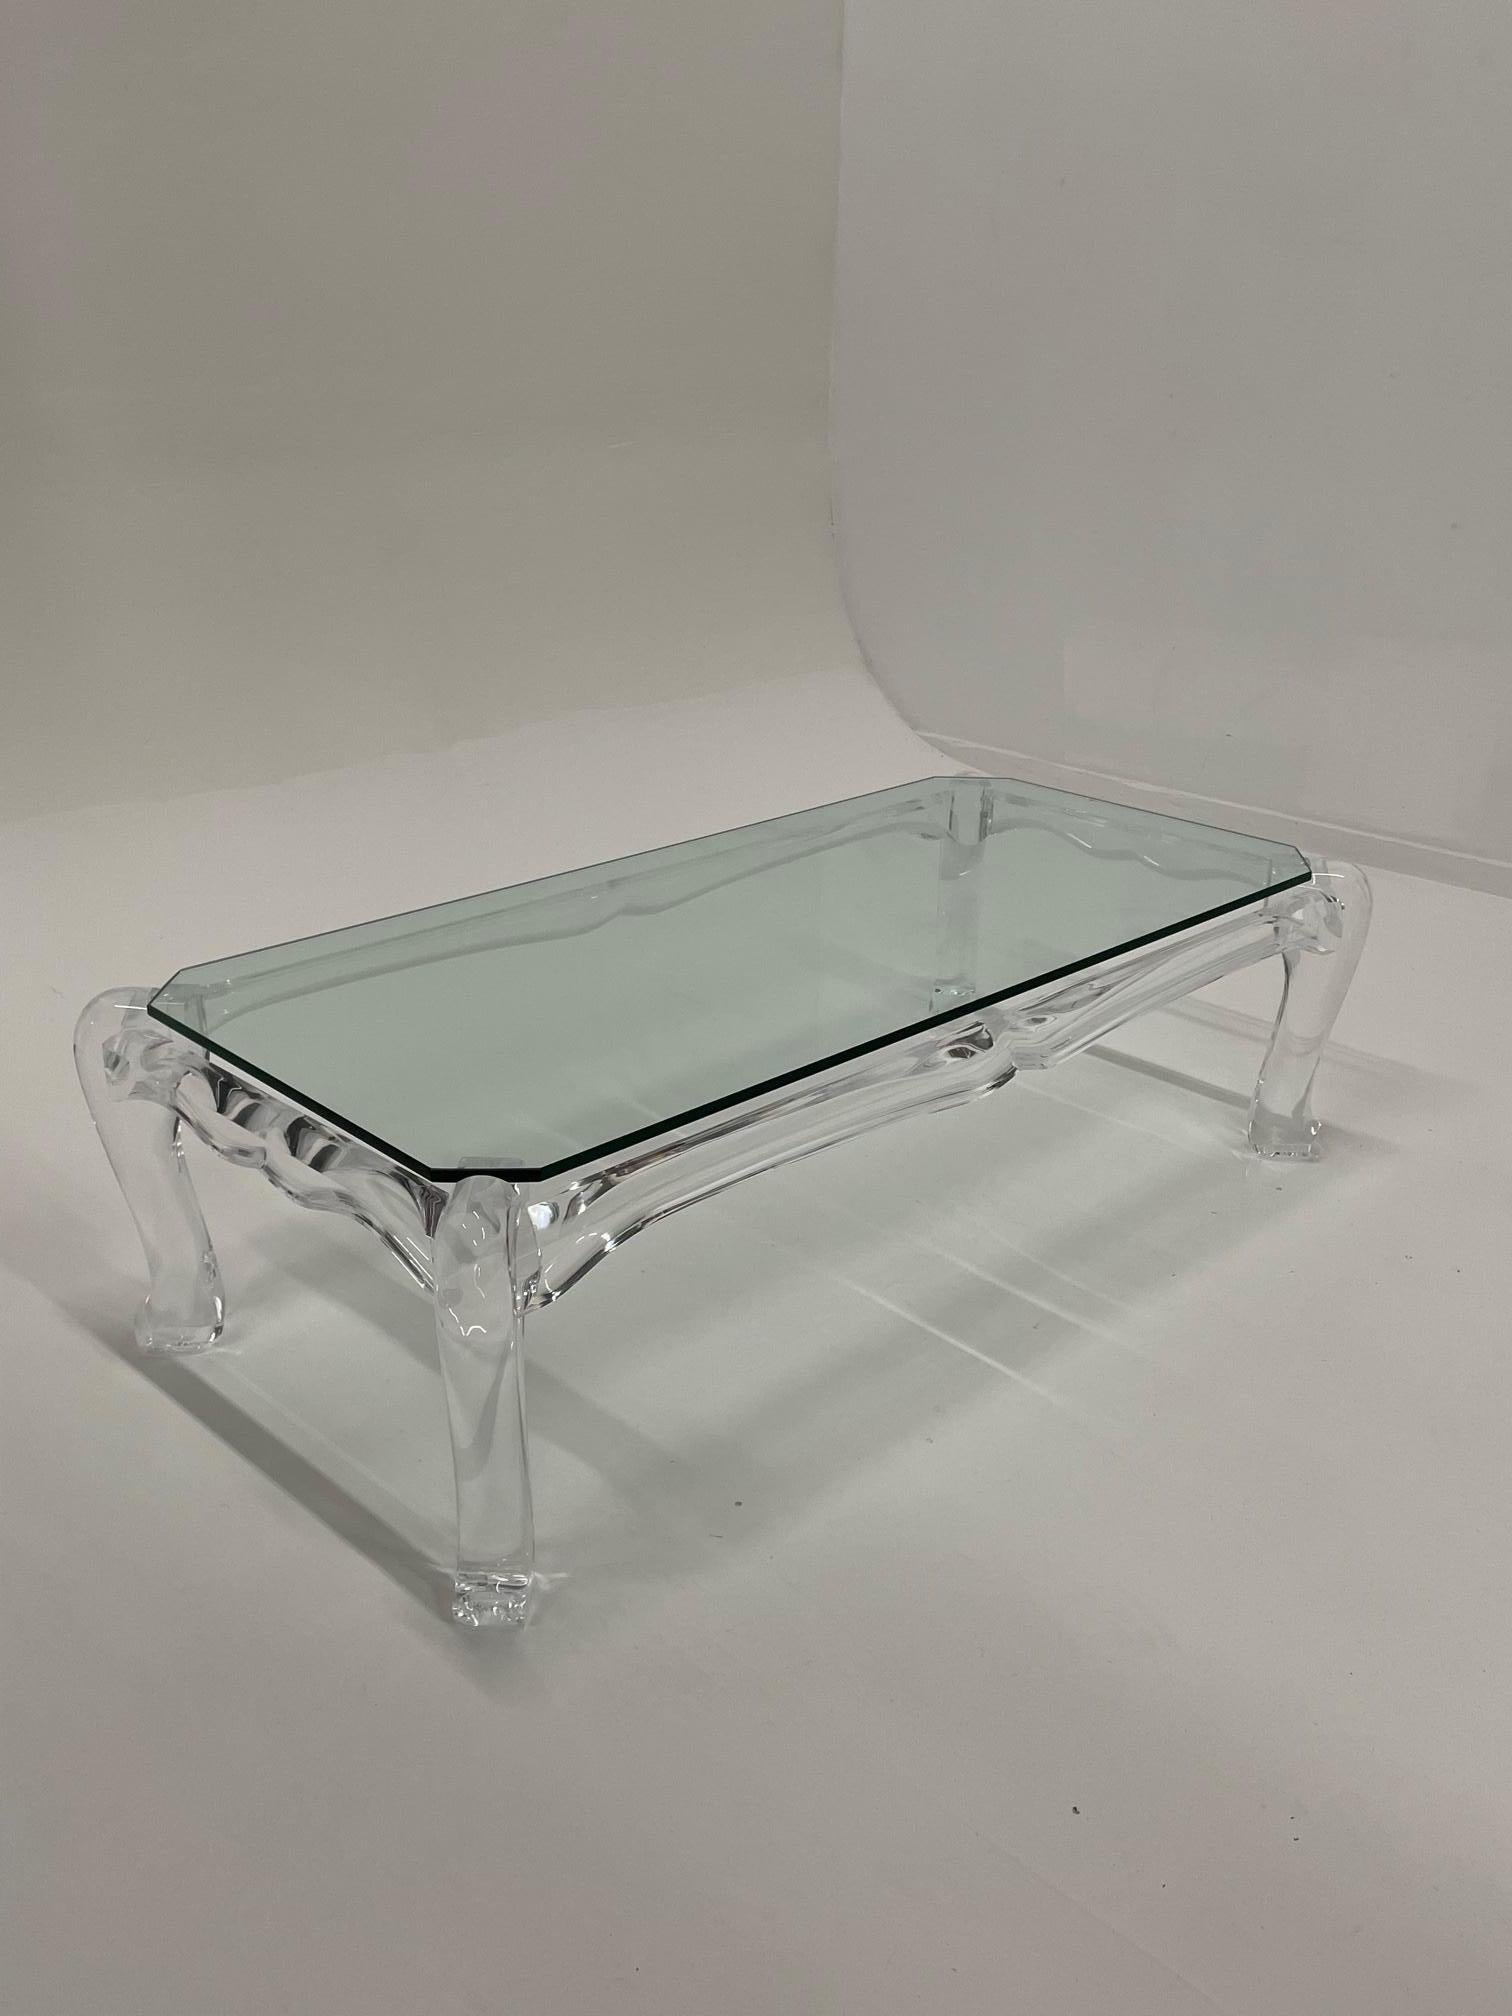 Super Hot Lucite Sculptural Mid-Century Modern Coffee Table For Sale 4